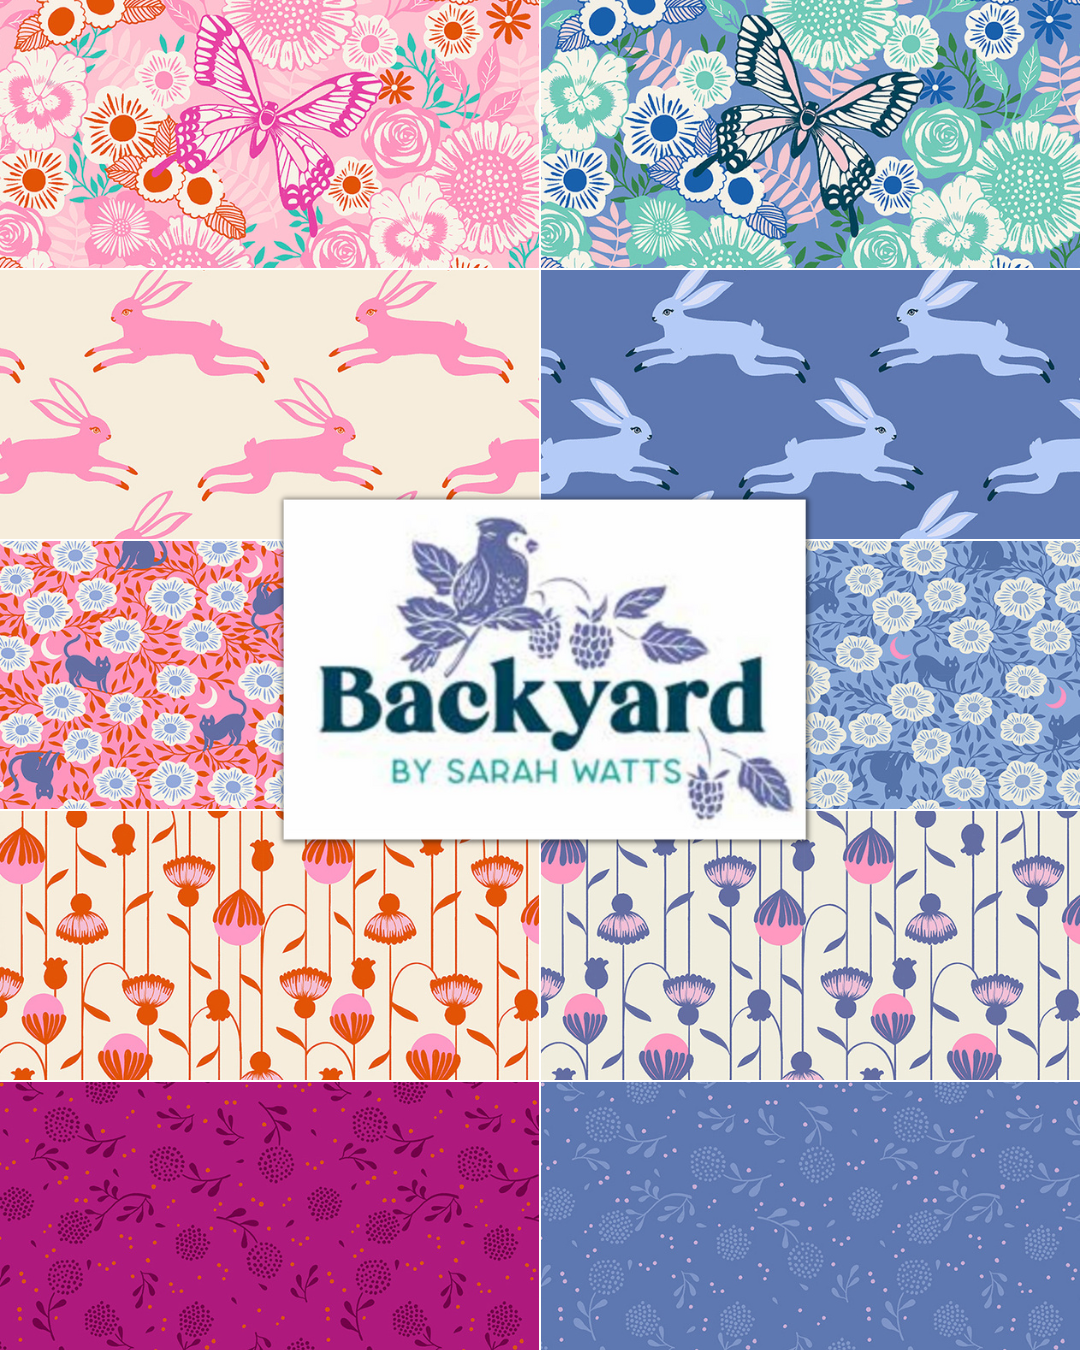 Pre-order modern quilting fabric from the Backyard collection designed by Sarah Watts for Ruby Star Society